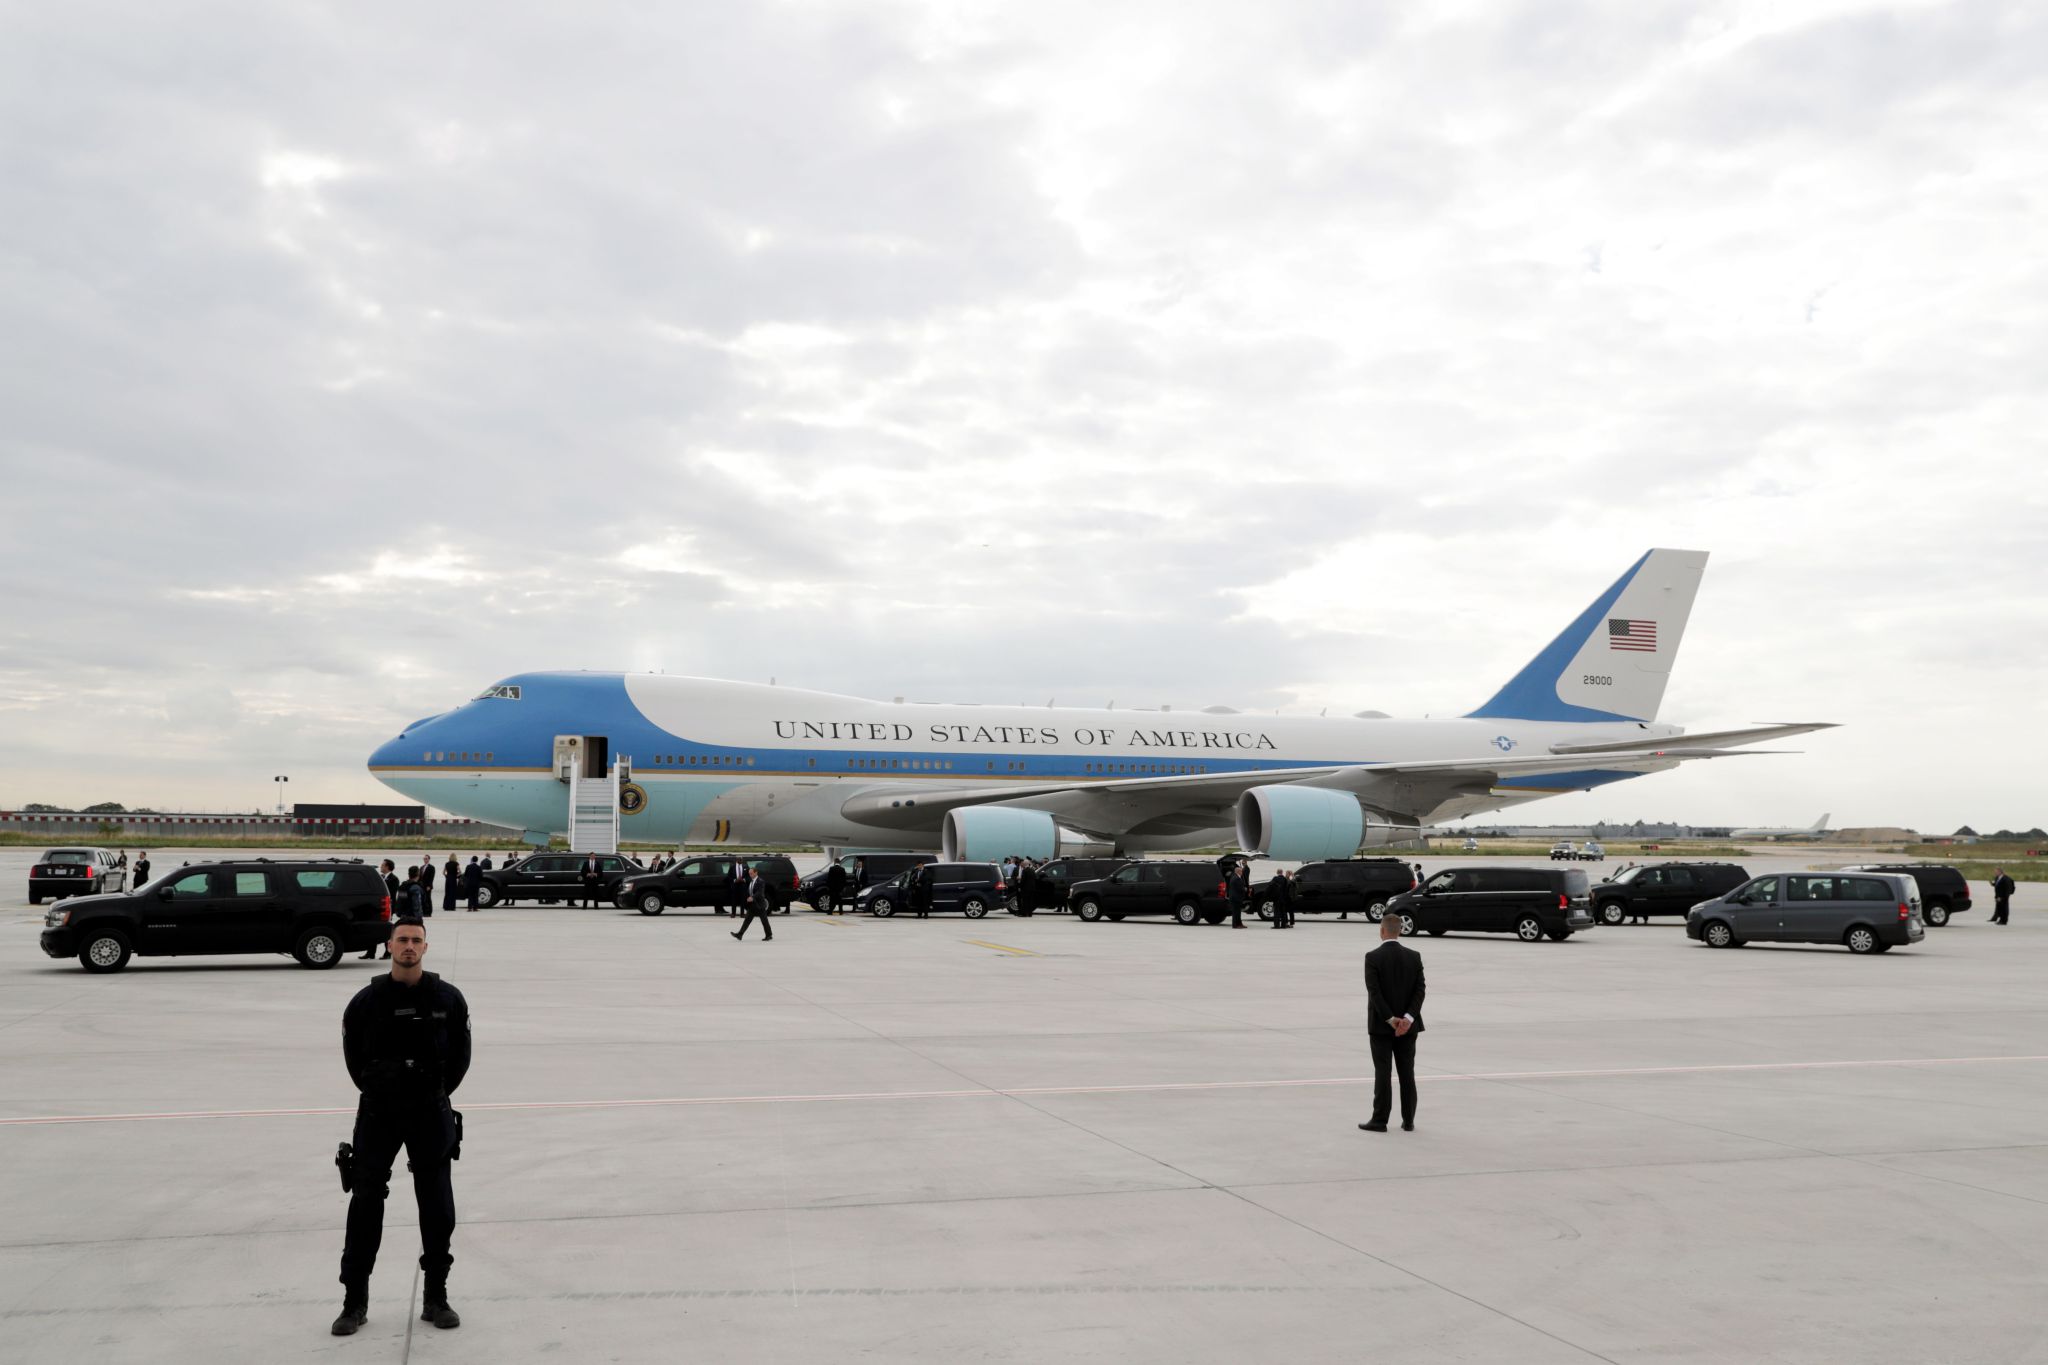 Who's Got the Biggest Plane? The VIP Jets of World Leaders